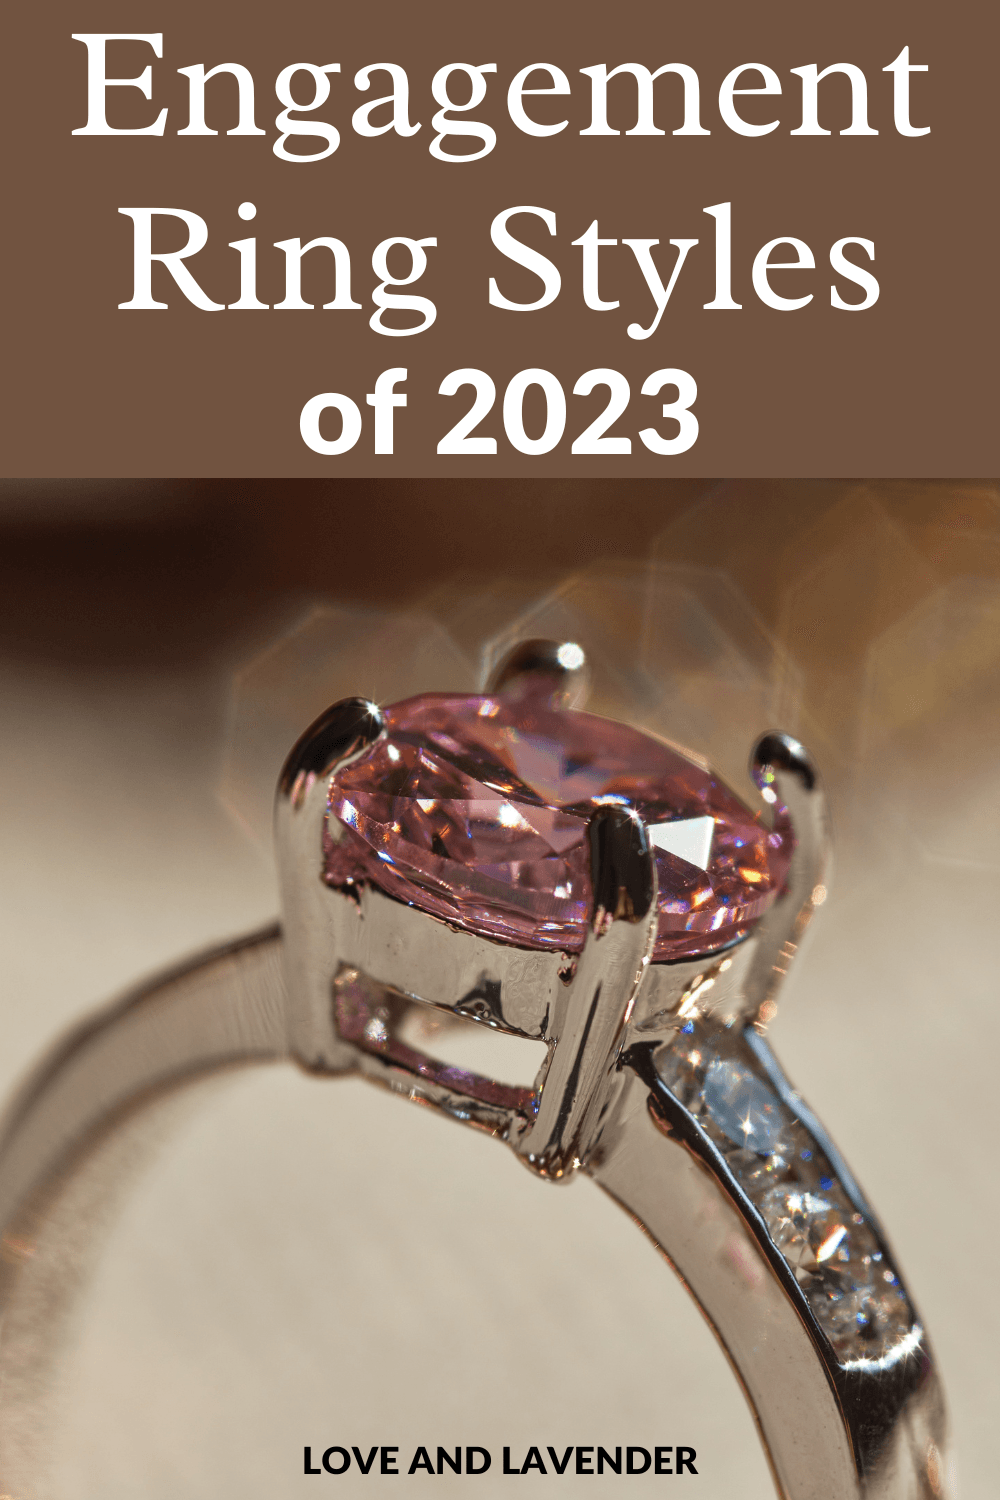 Engagement Ring Styles, Trends, and Ideas for 2023